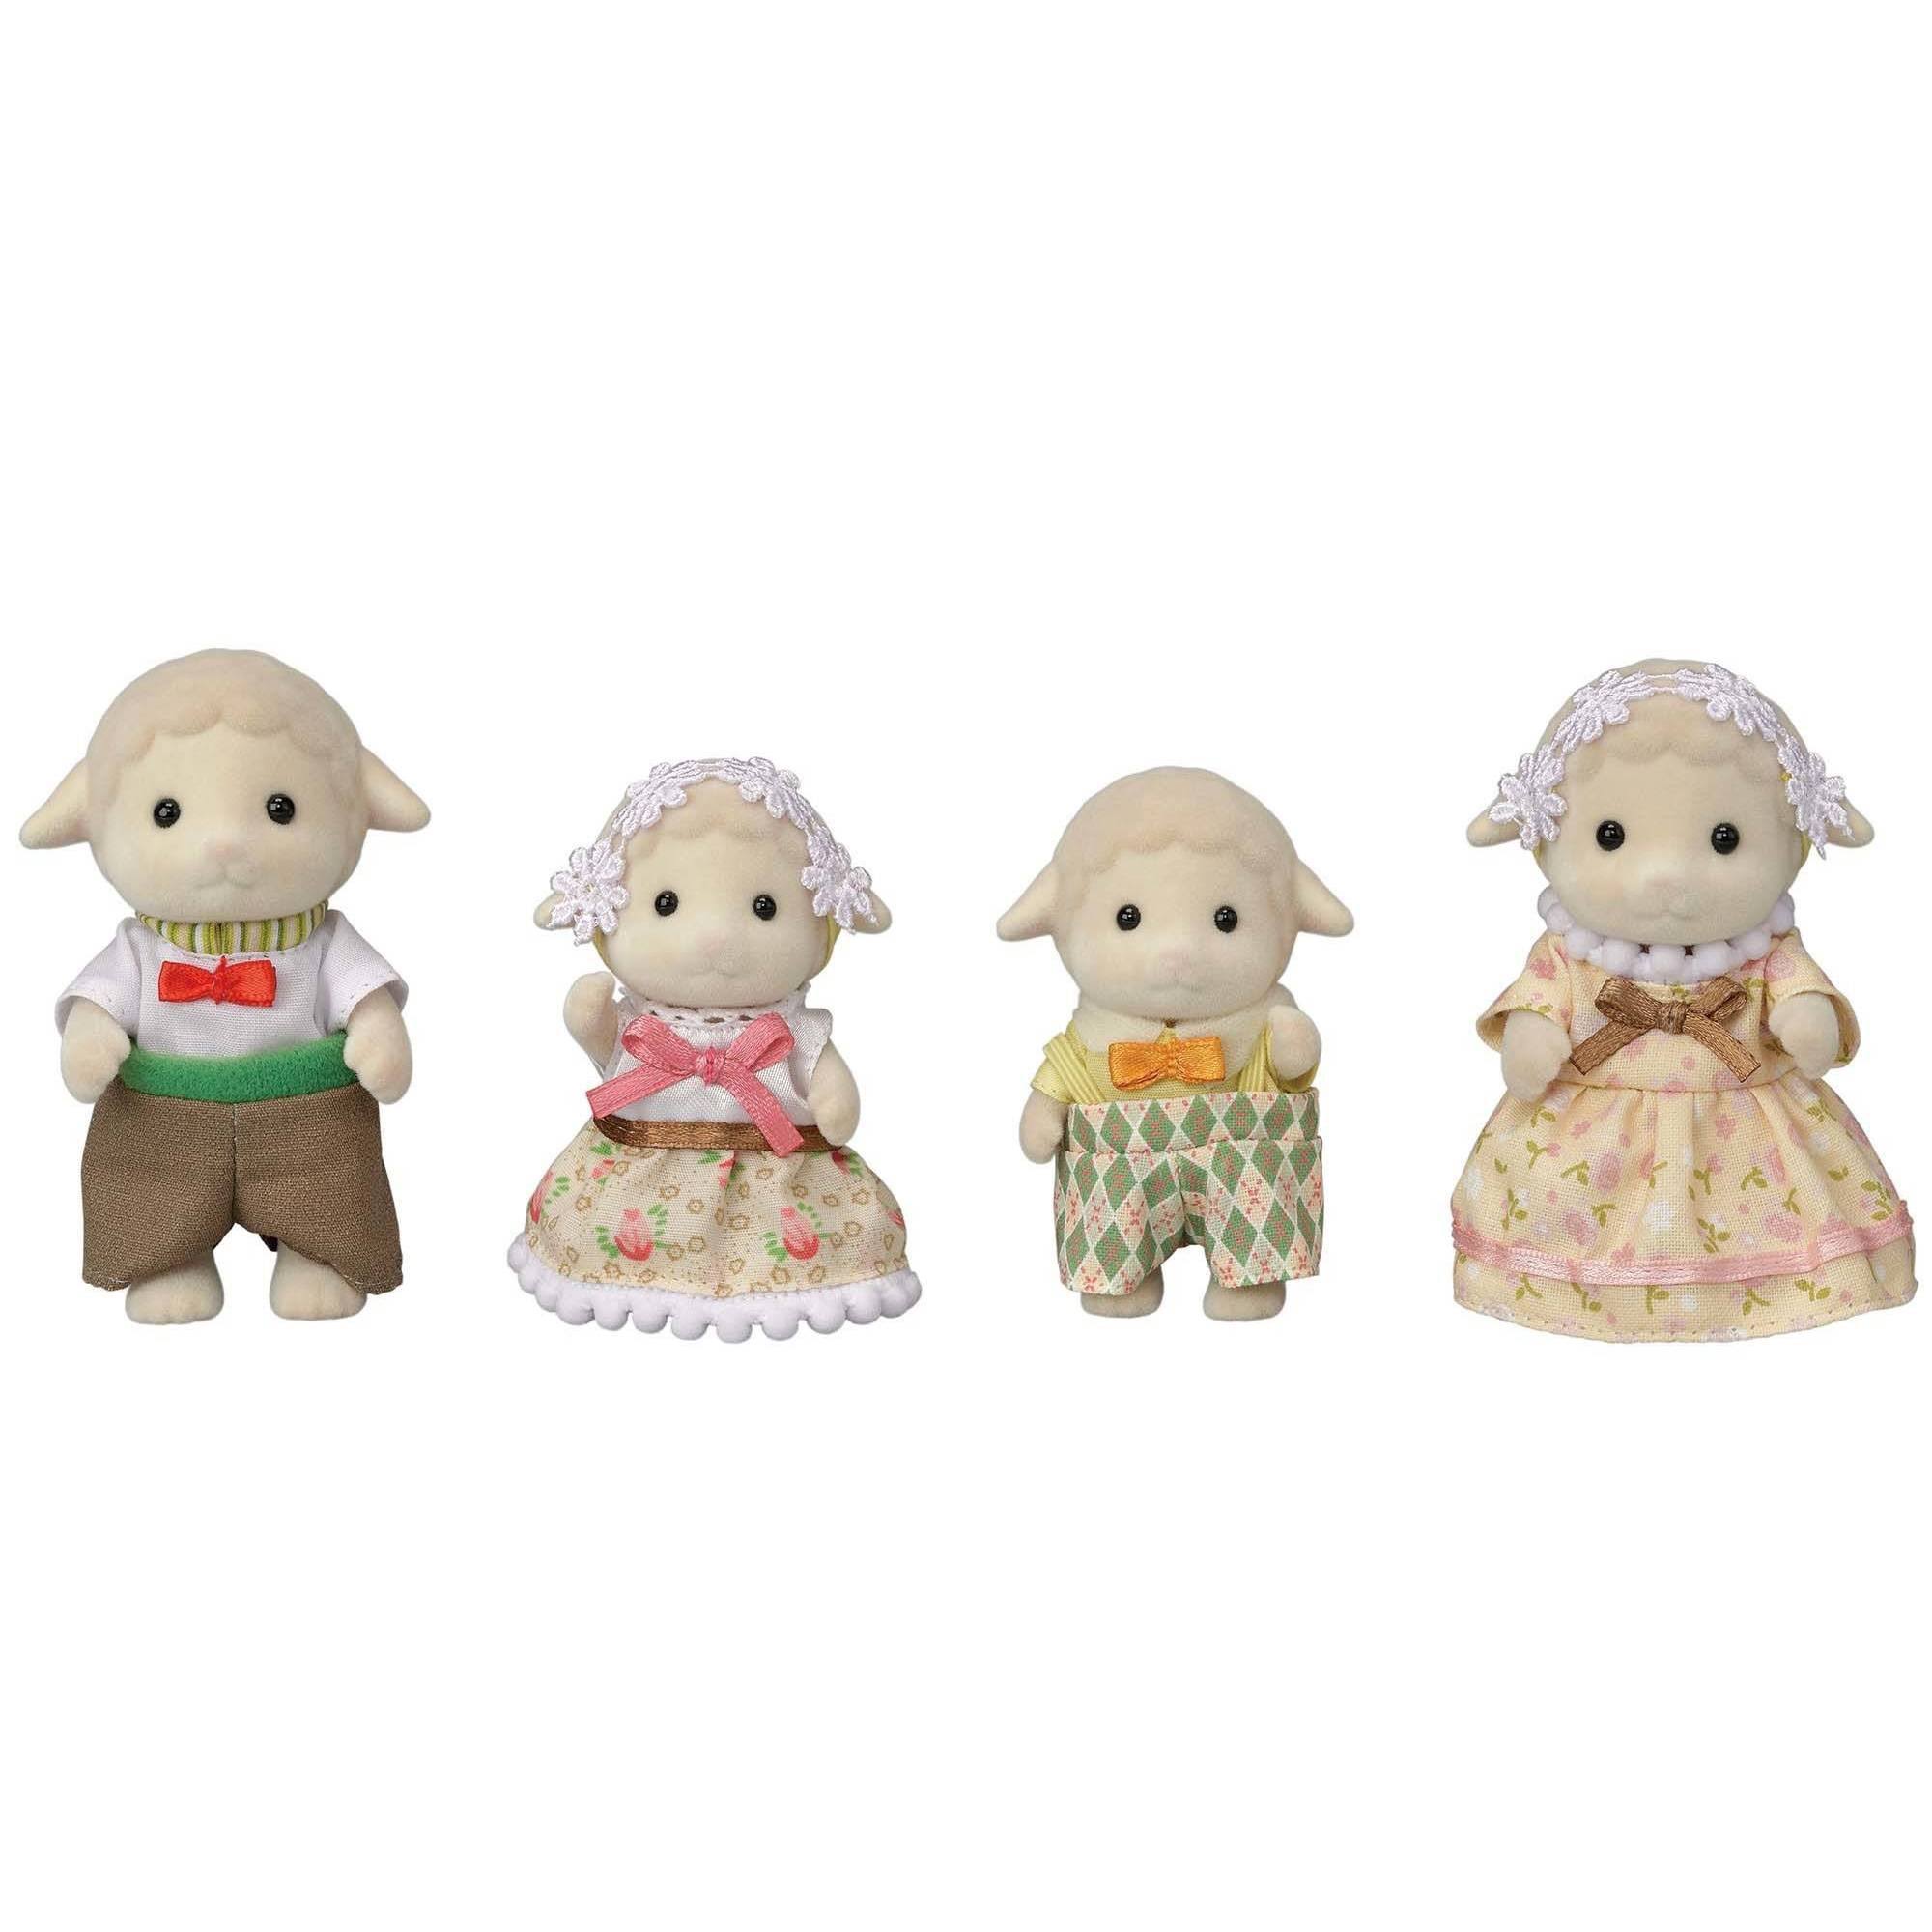 Calico Critters - Sheep Family